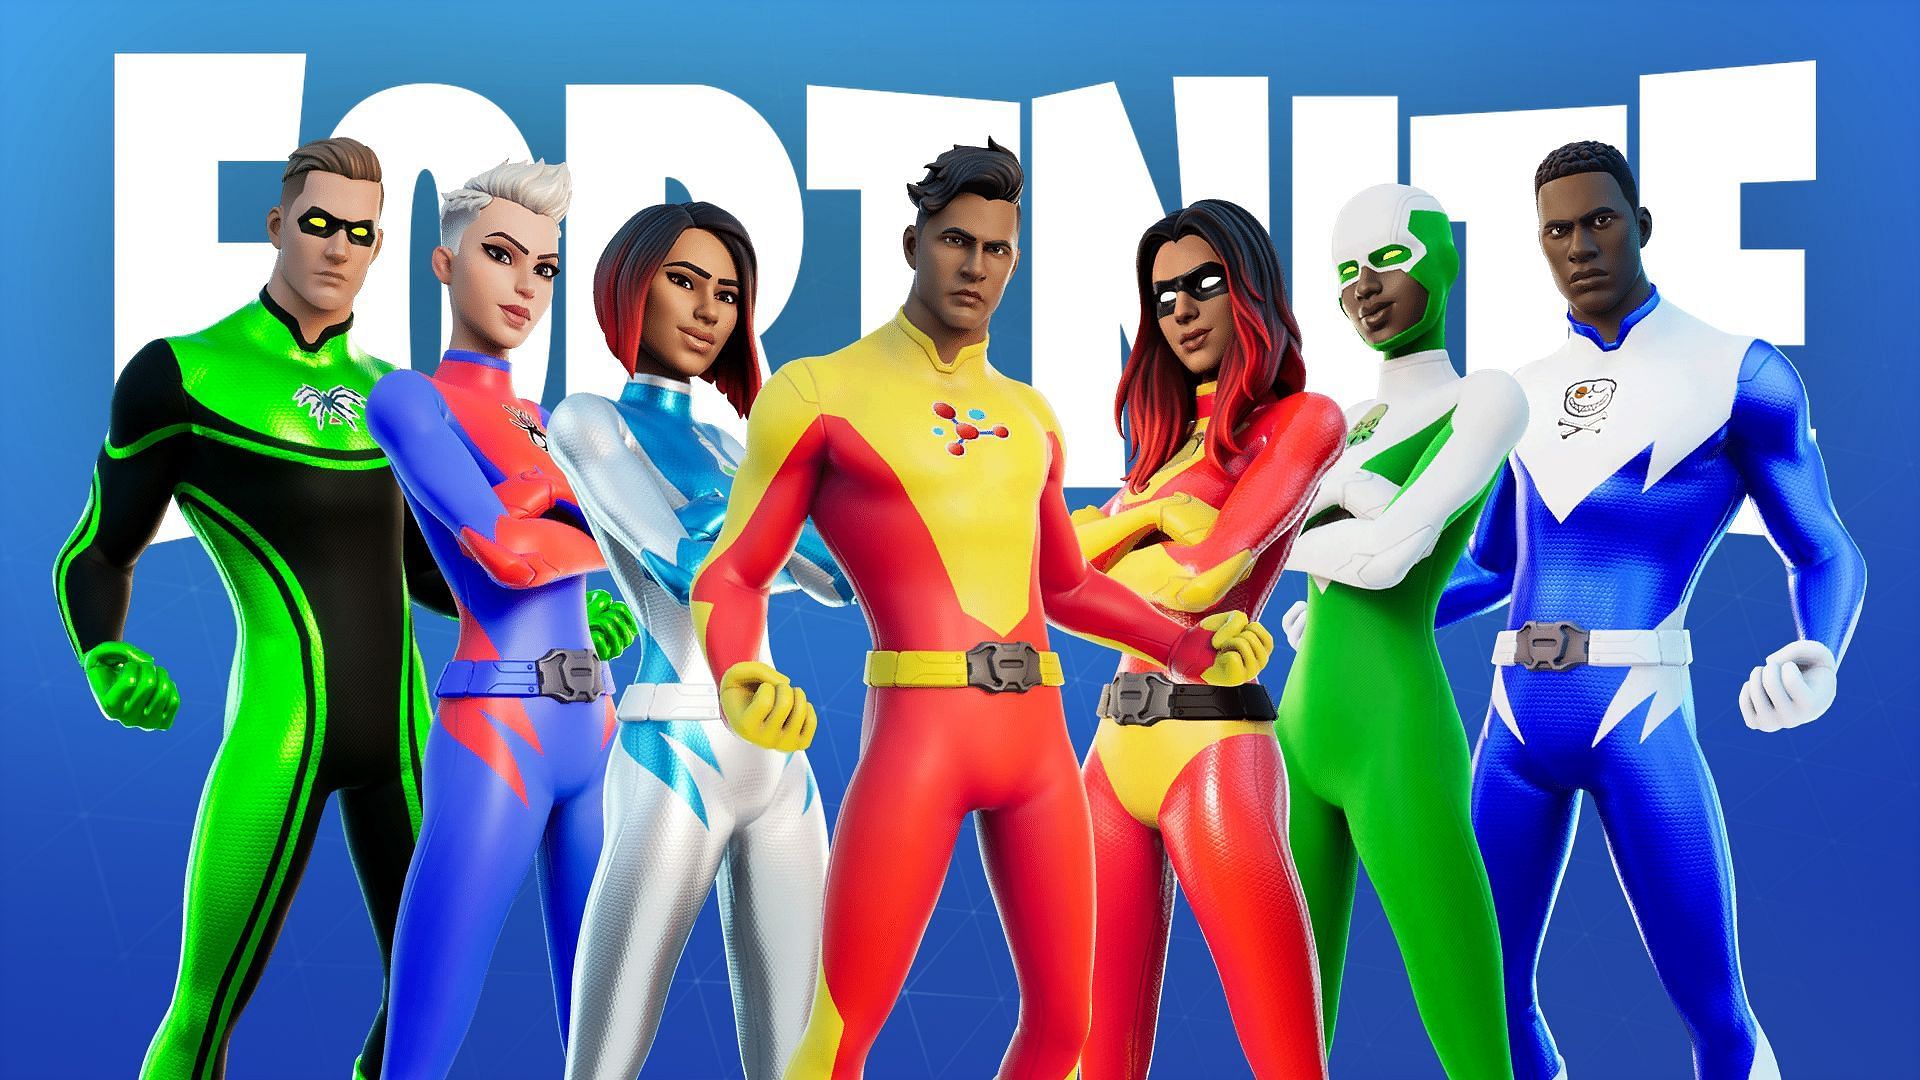 The customizable superhero skin is one of the sweaty skins seen in almost every Fortnite match in Chapter 3 (Image via Epic Games)